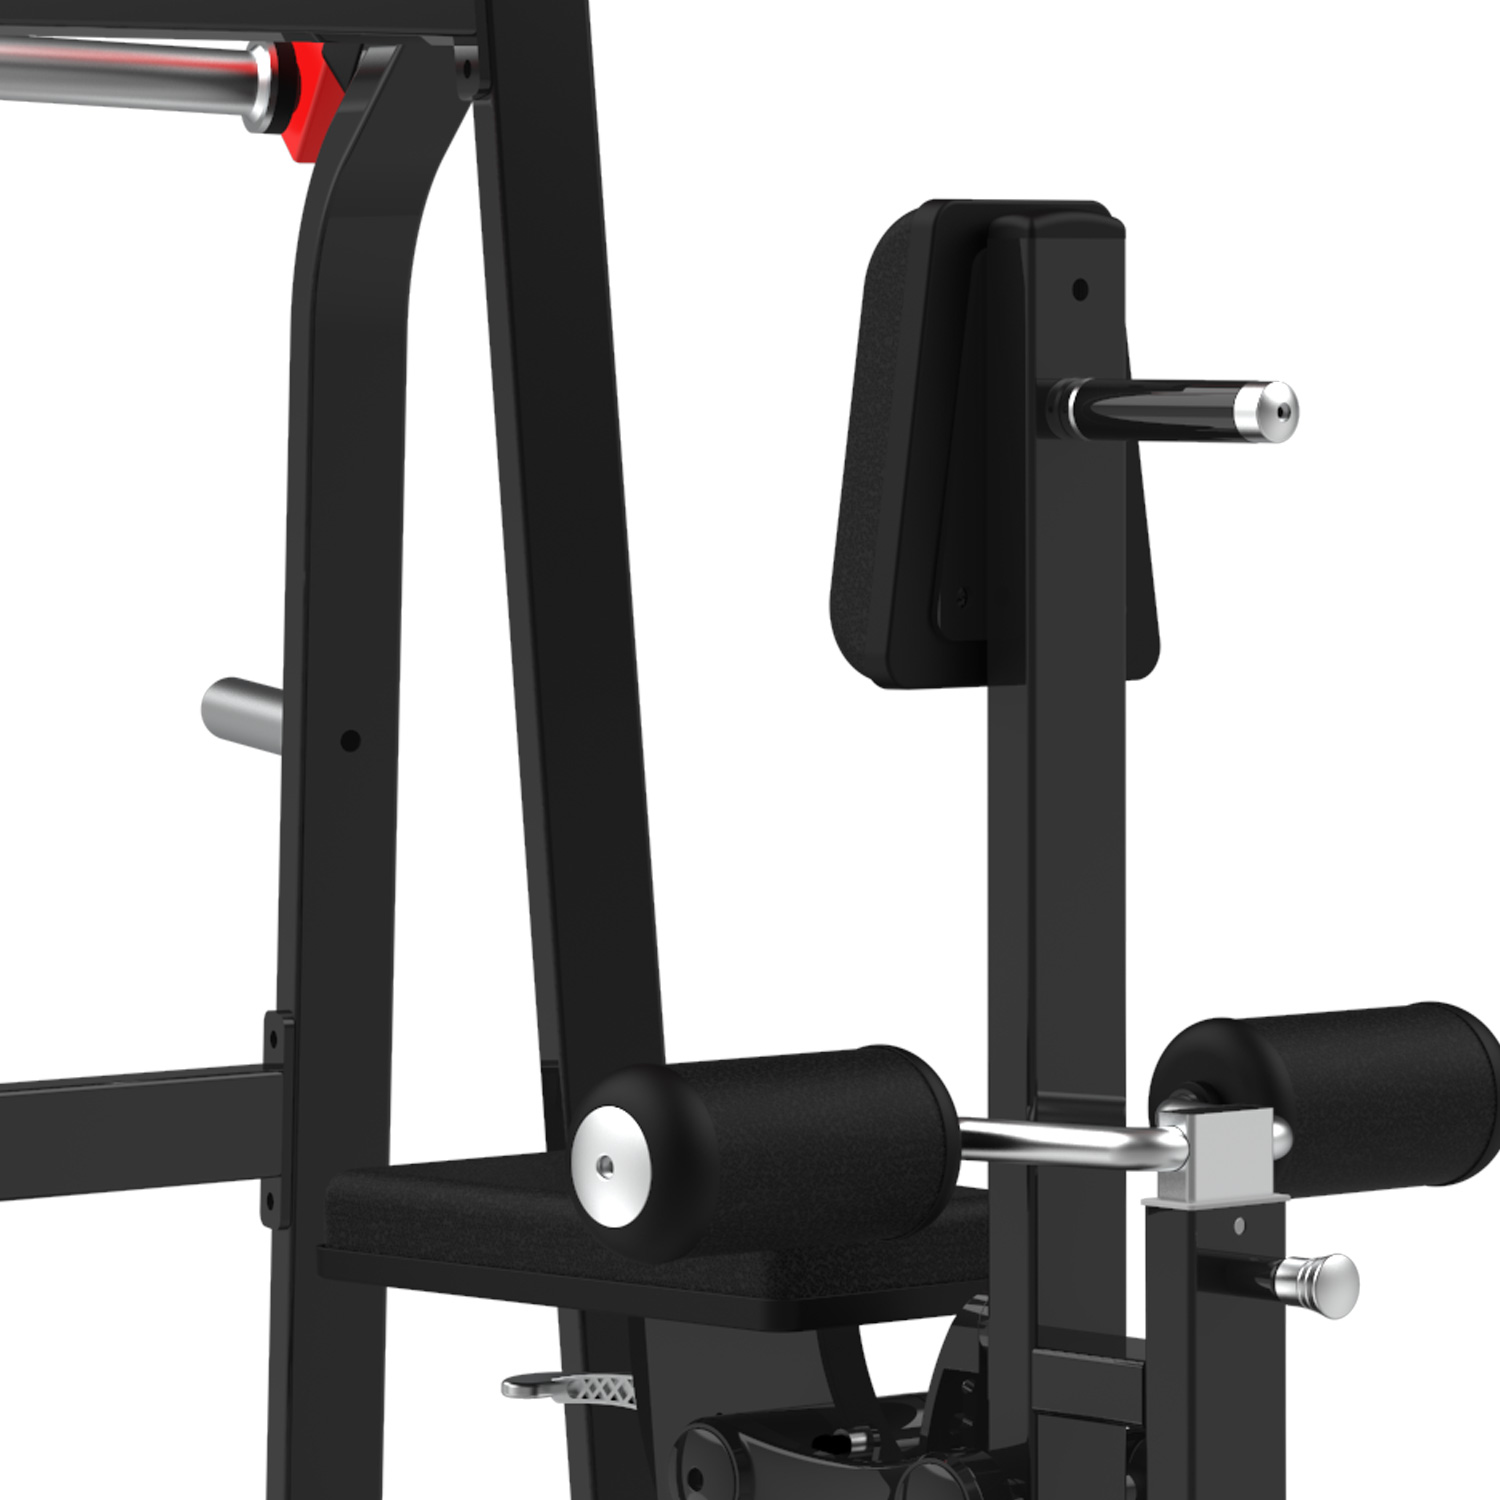 HS Pro-1006 Front Lat Pulldown